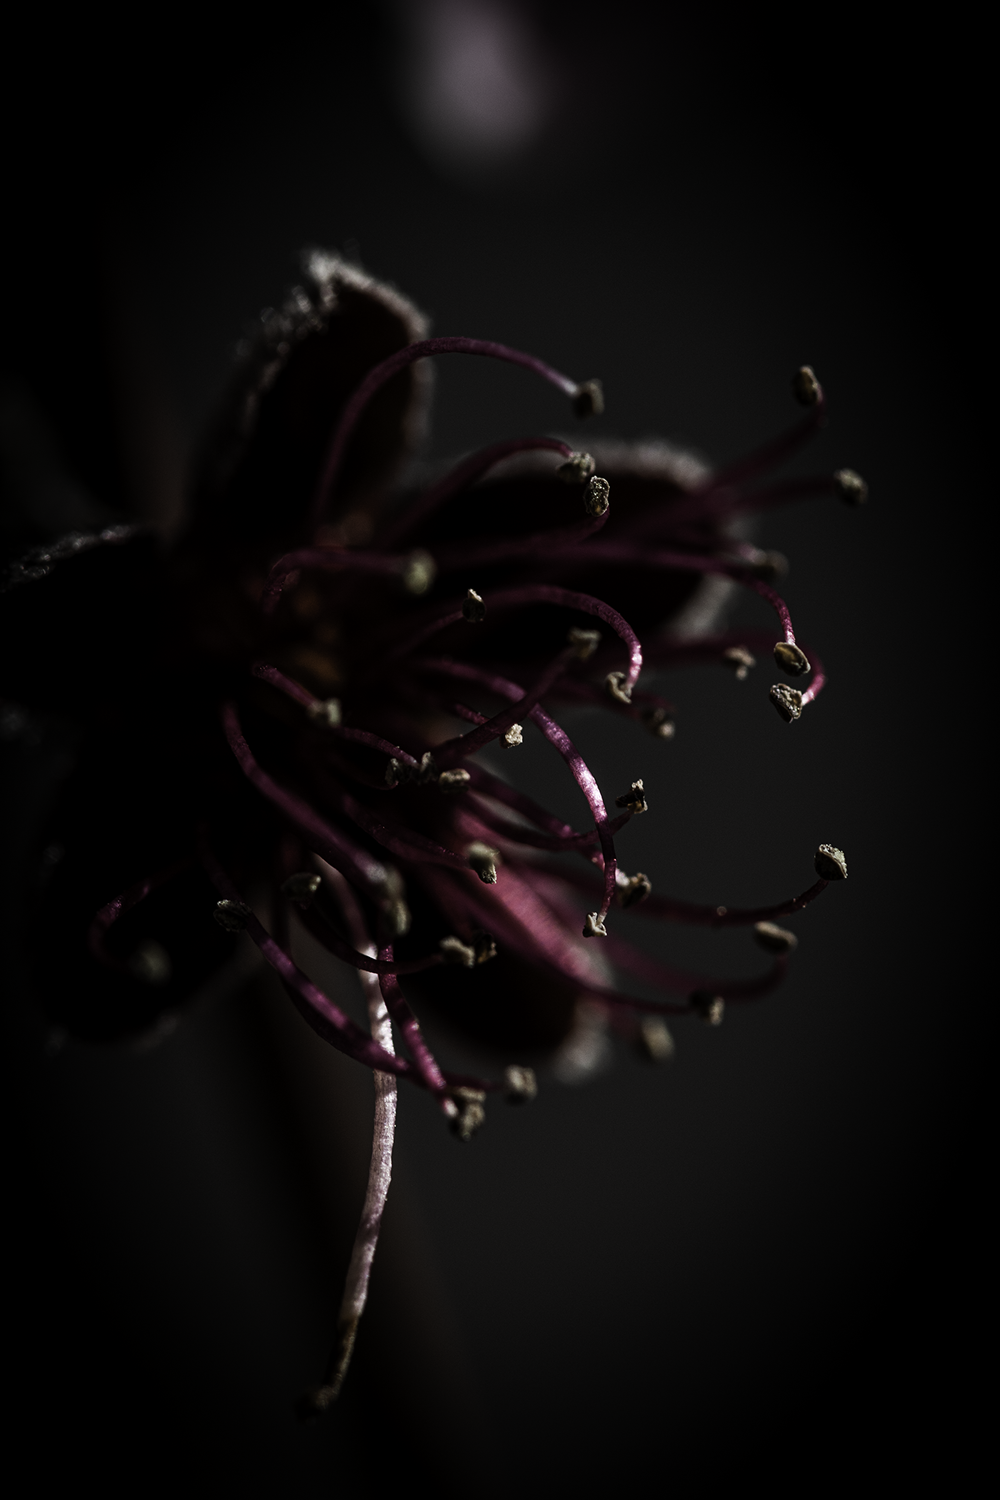 Colour photograph of flower detail with dark shadows.